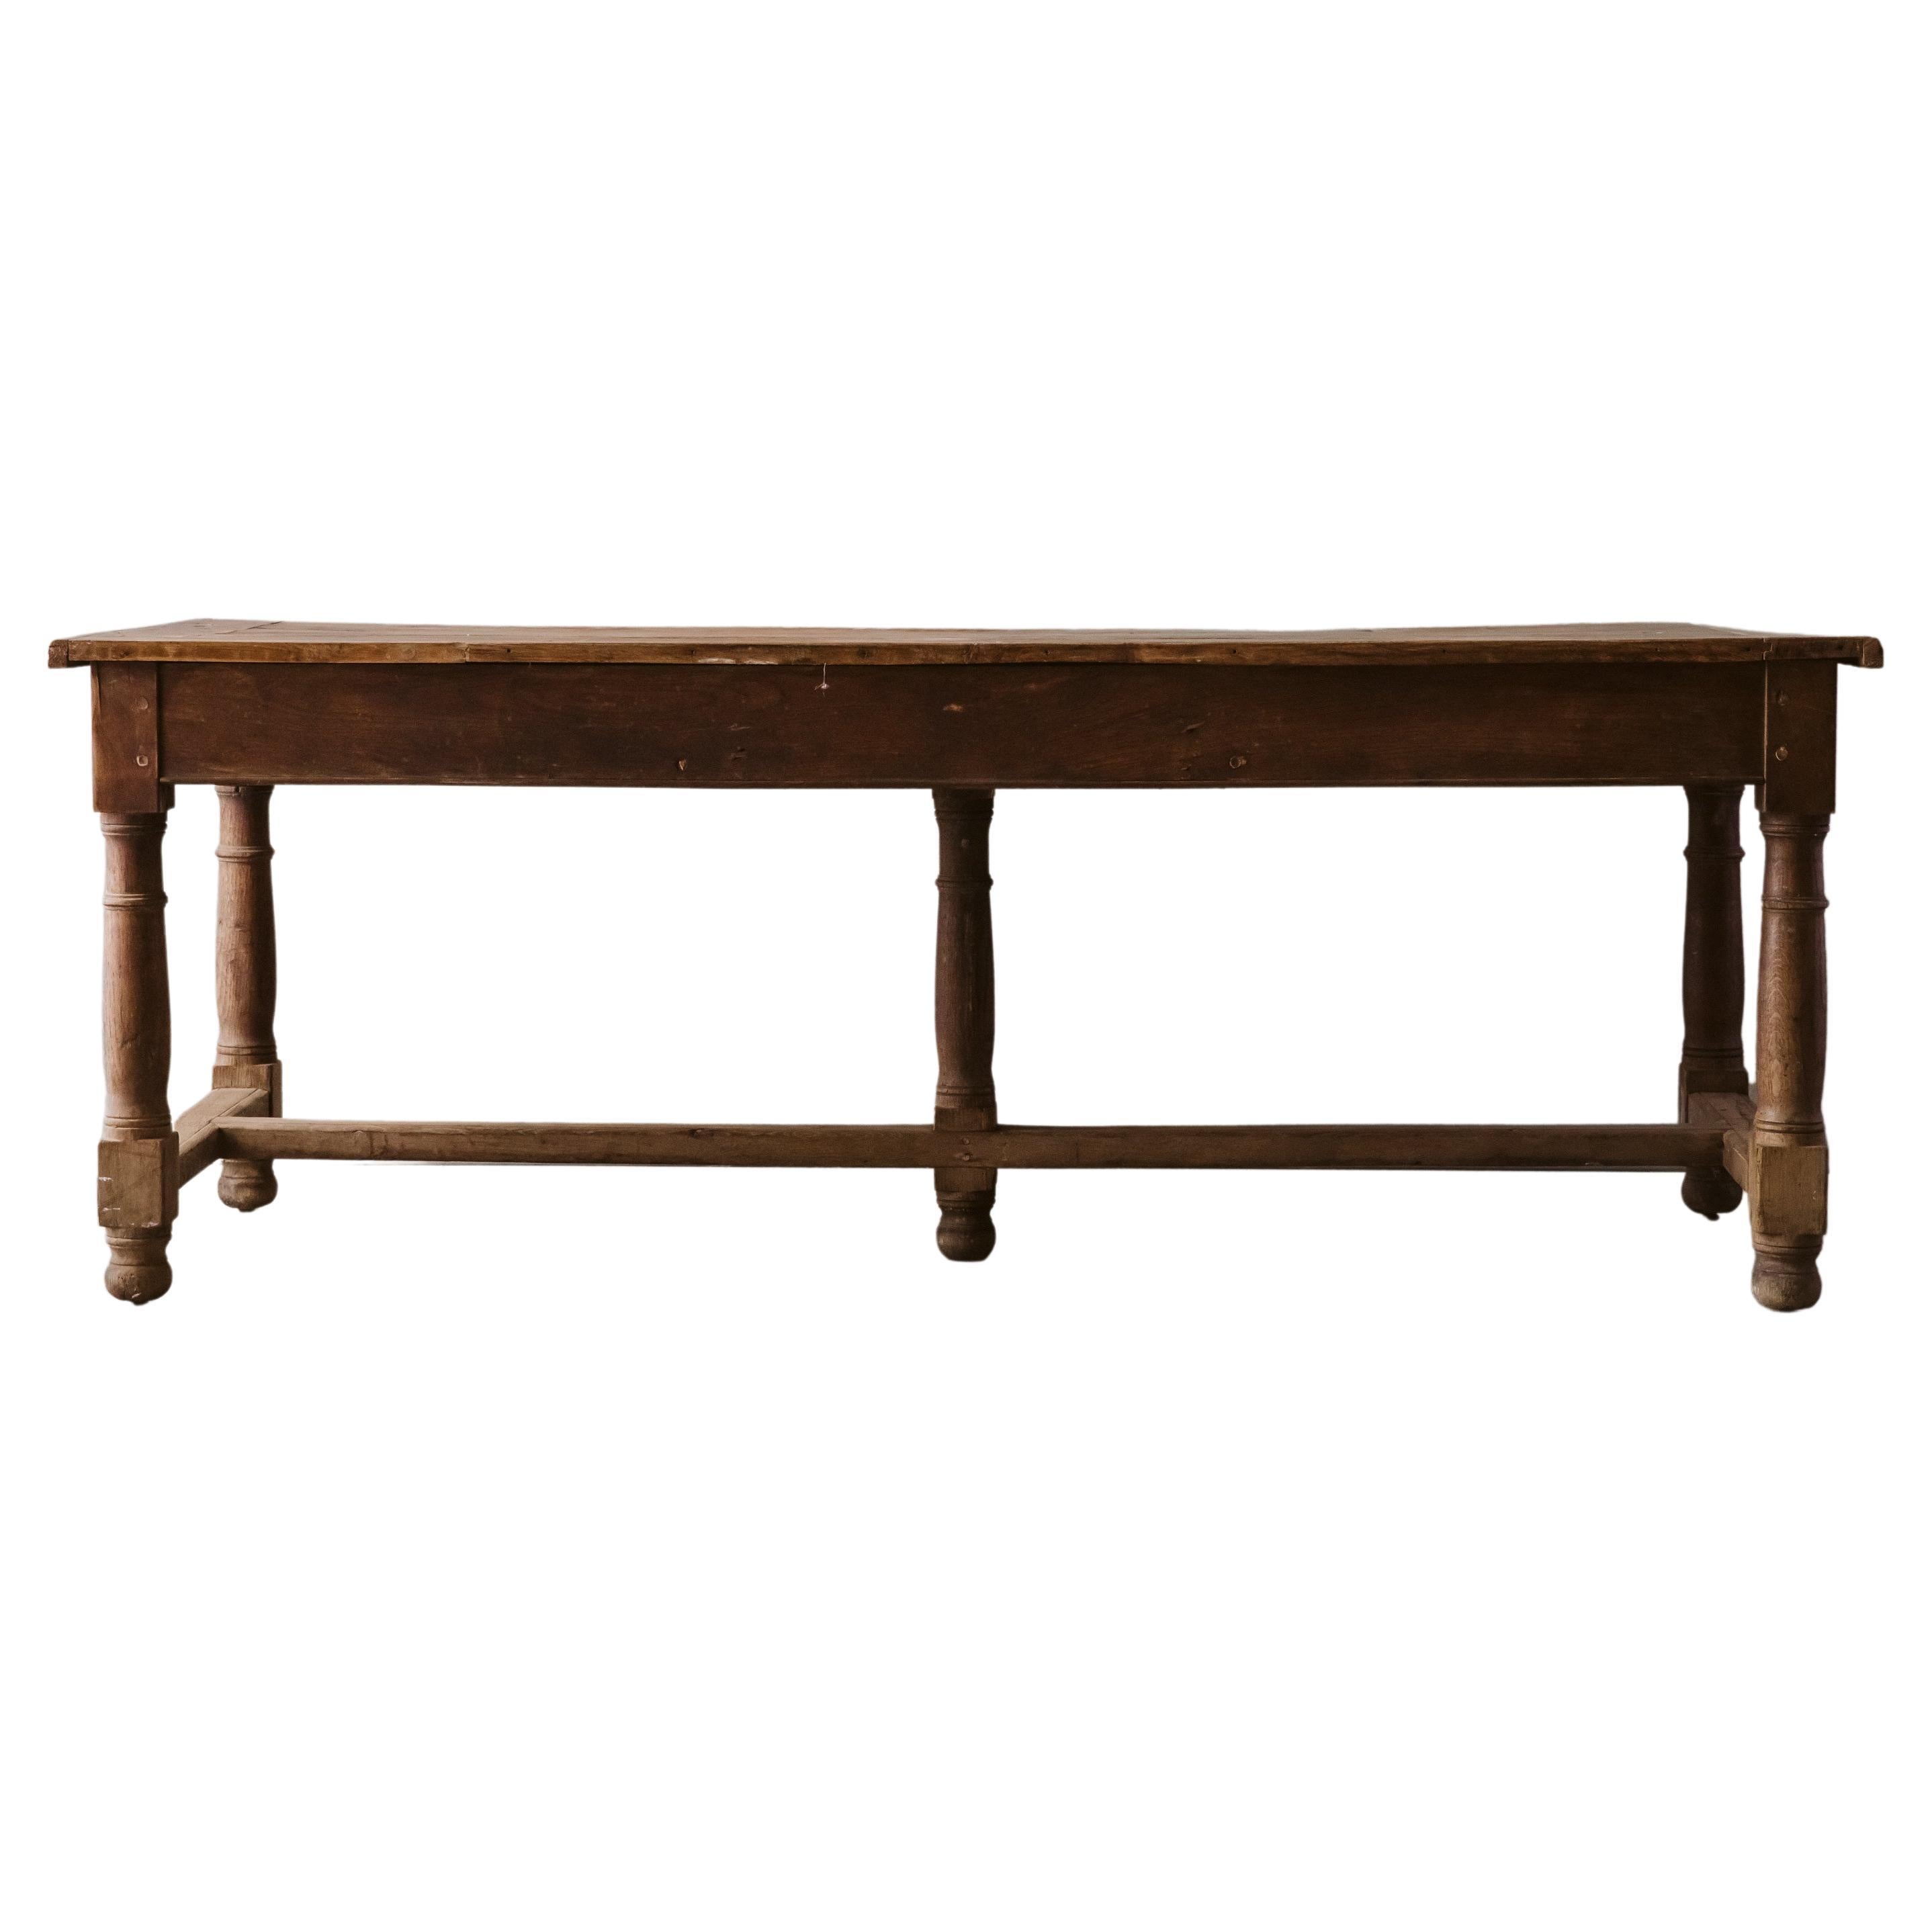 Early Oak Dining Table From France, Circa 1900